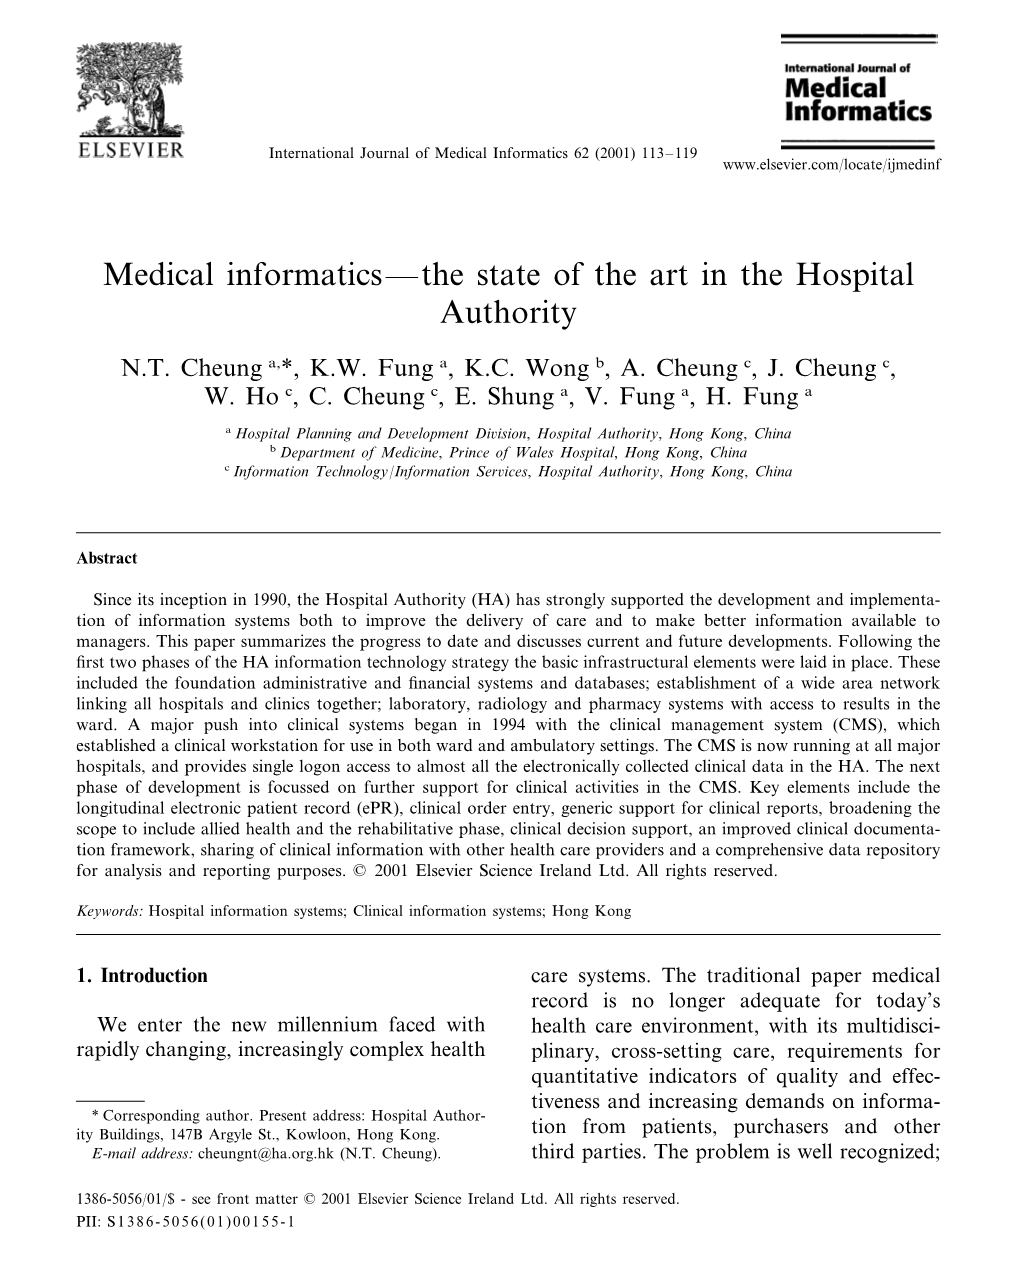 Medical Informatics—The State of the Art in the Hospital Authority